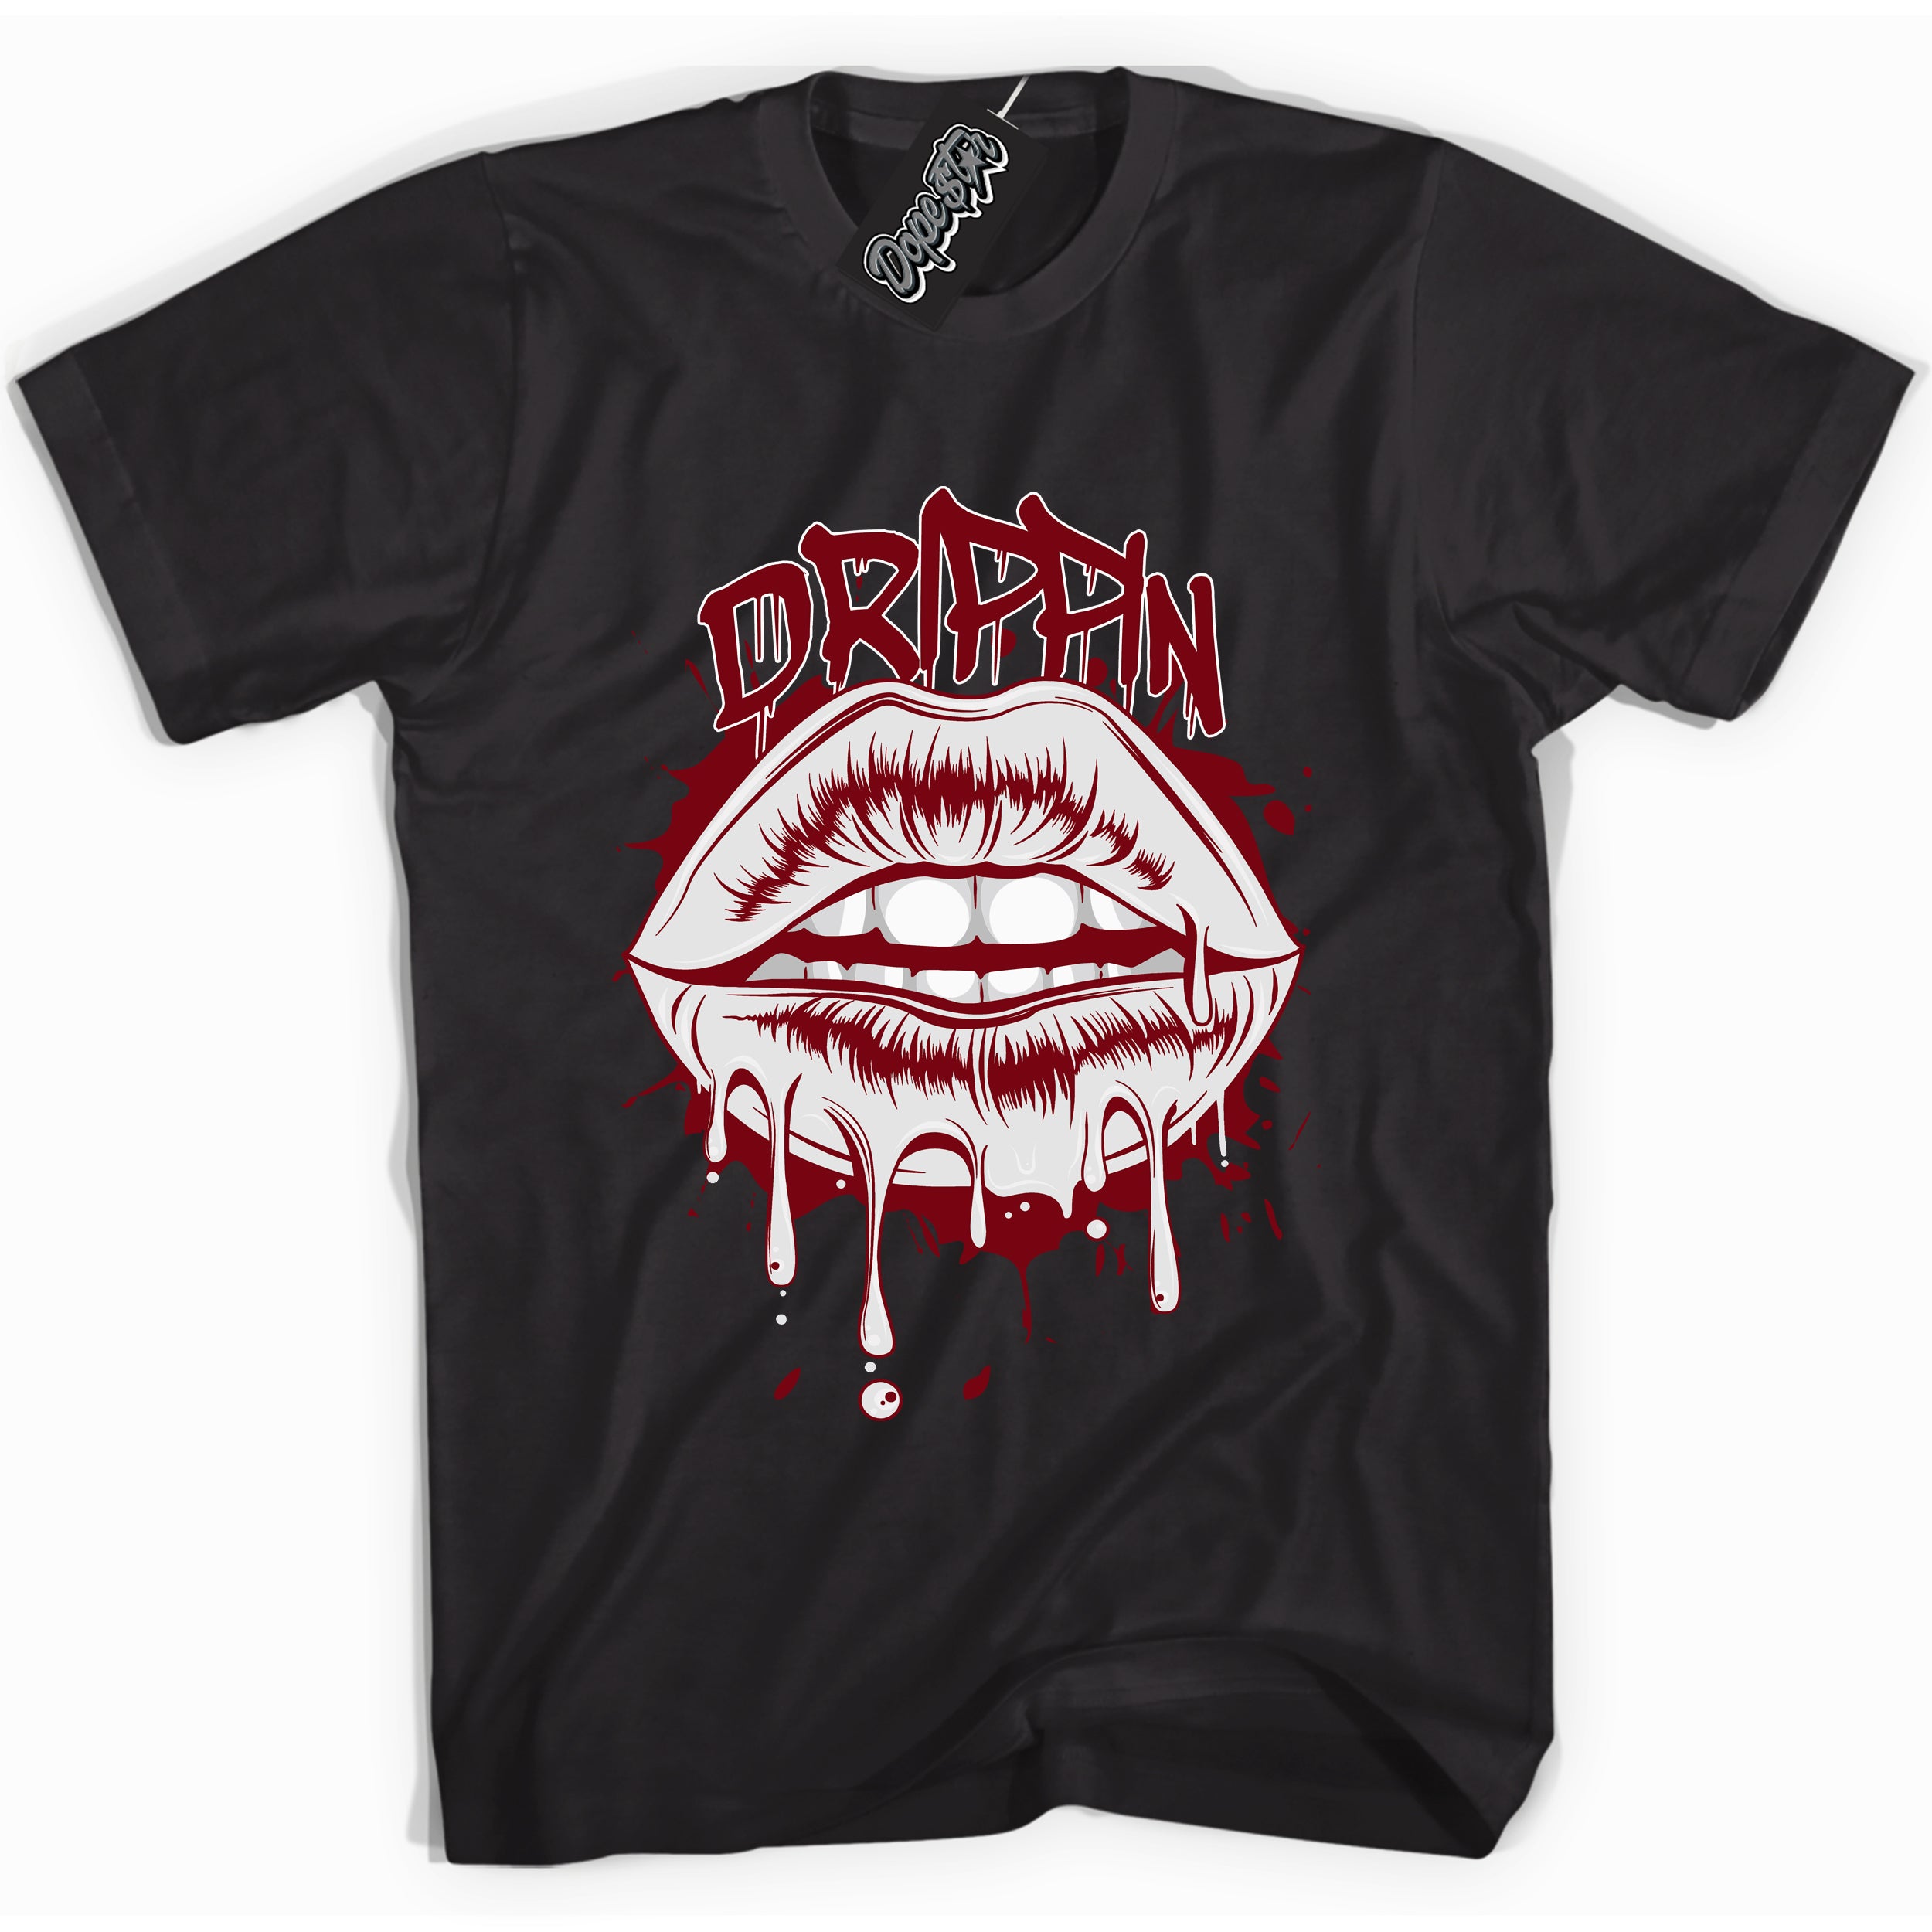 Cool Black graphic tee with “ Drippin ” print, that perfectly matches OG Metallic Burgundy 1s sneakers 